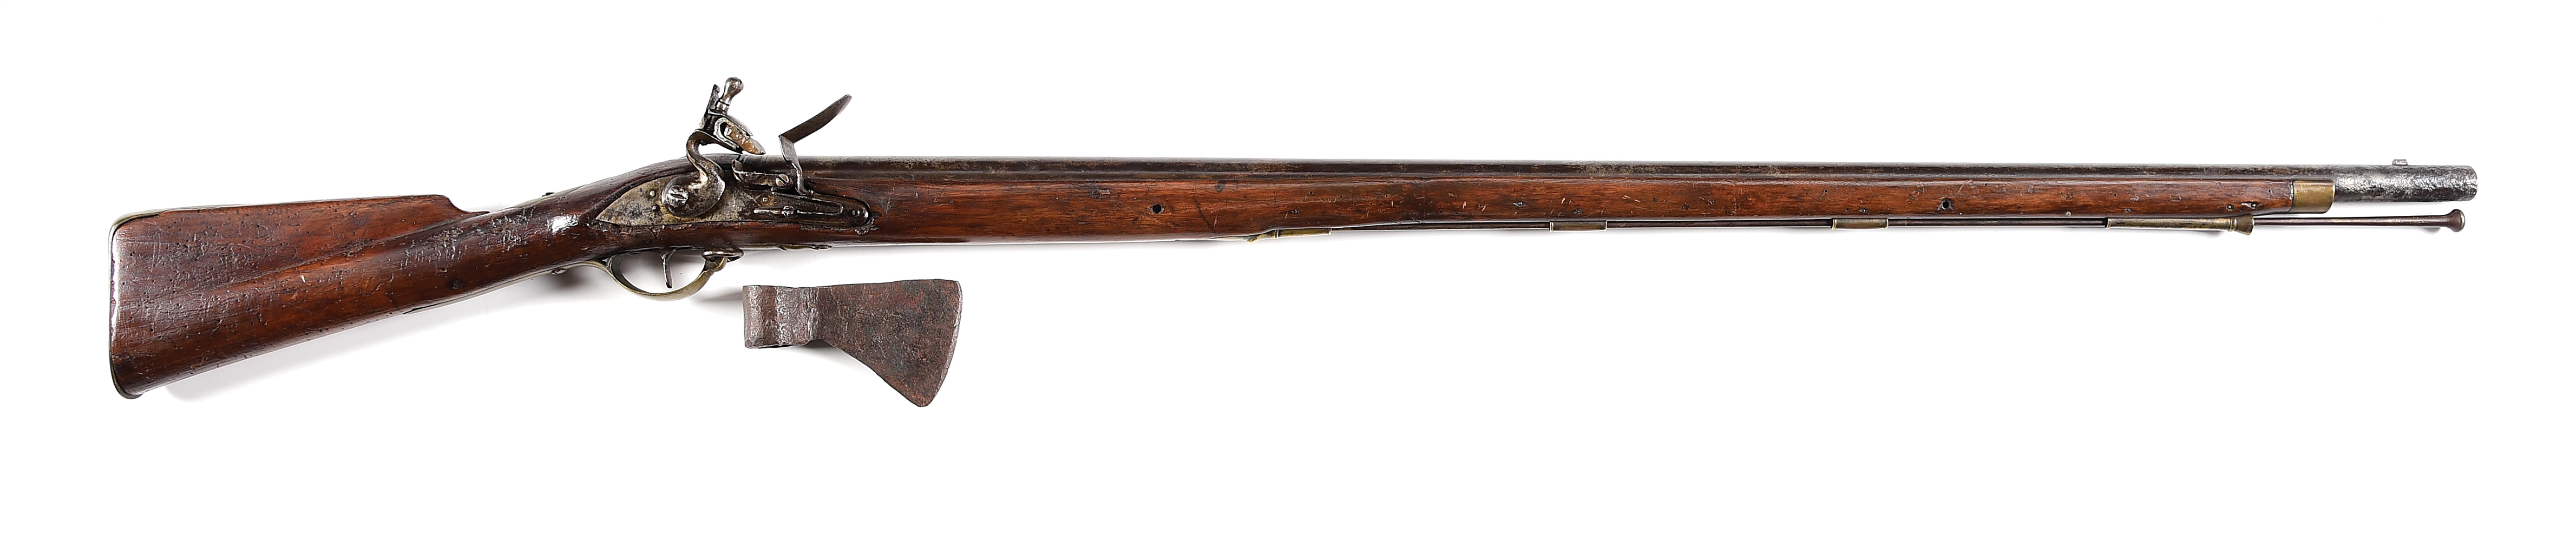 (A) MARYLAND COMMITTEE OF SAFETY TYPE MUSKET AND BELT AX HEAD ATTRIBUTED TO THOMAS EWING.